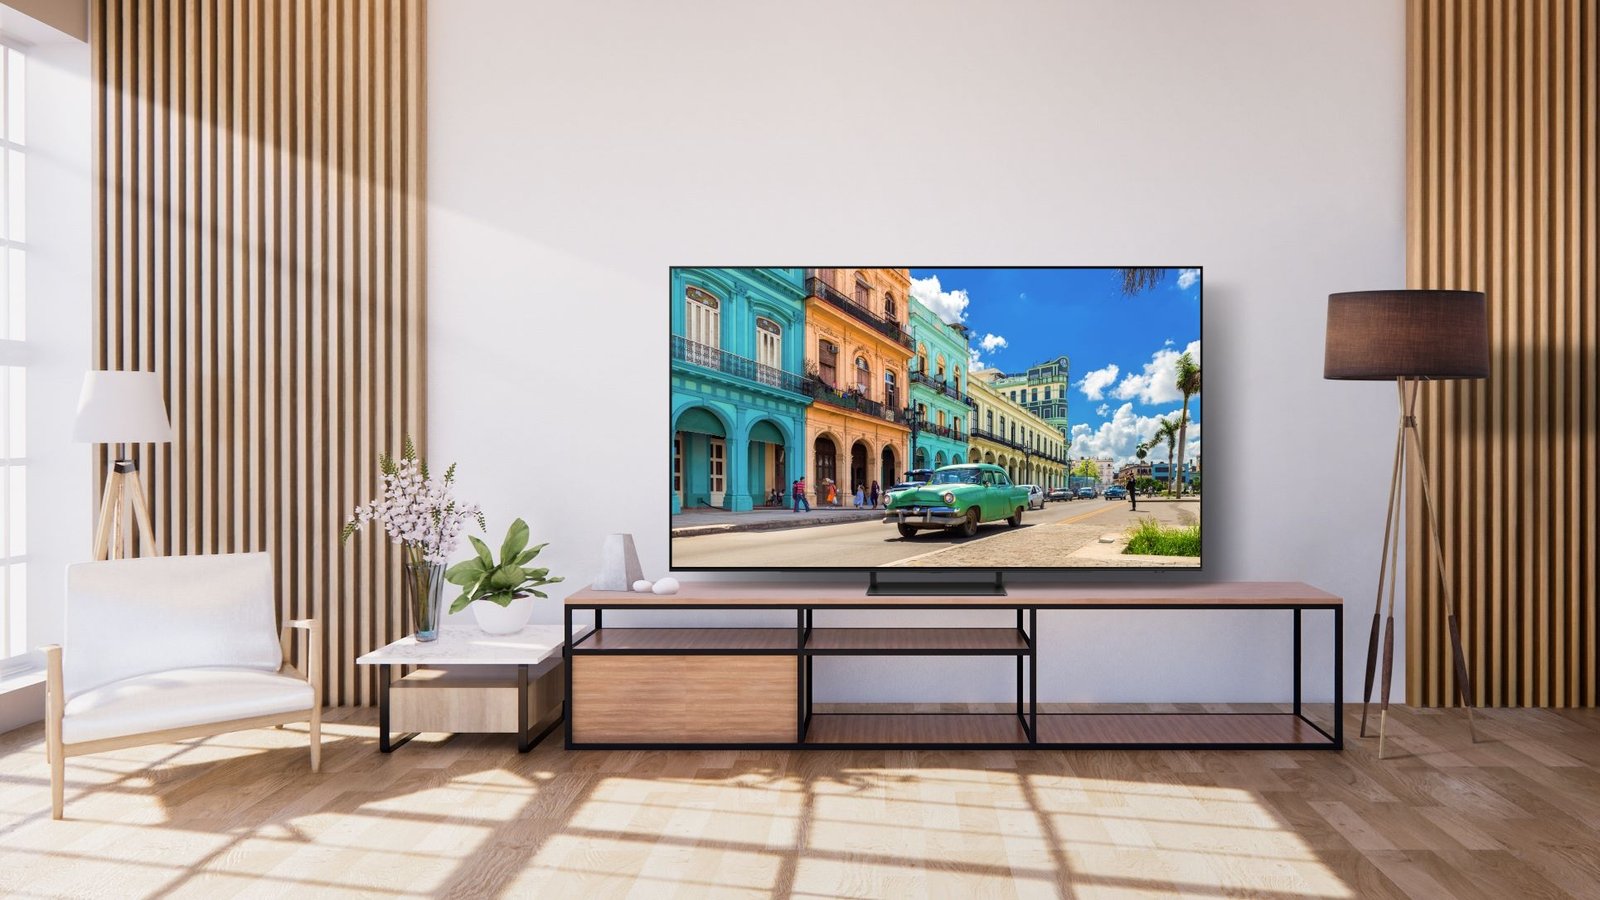 Samsung launches new OLED TV range with Neural Quantum Processor 4K